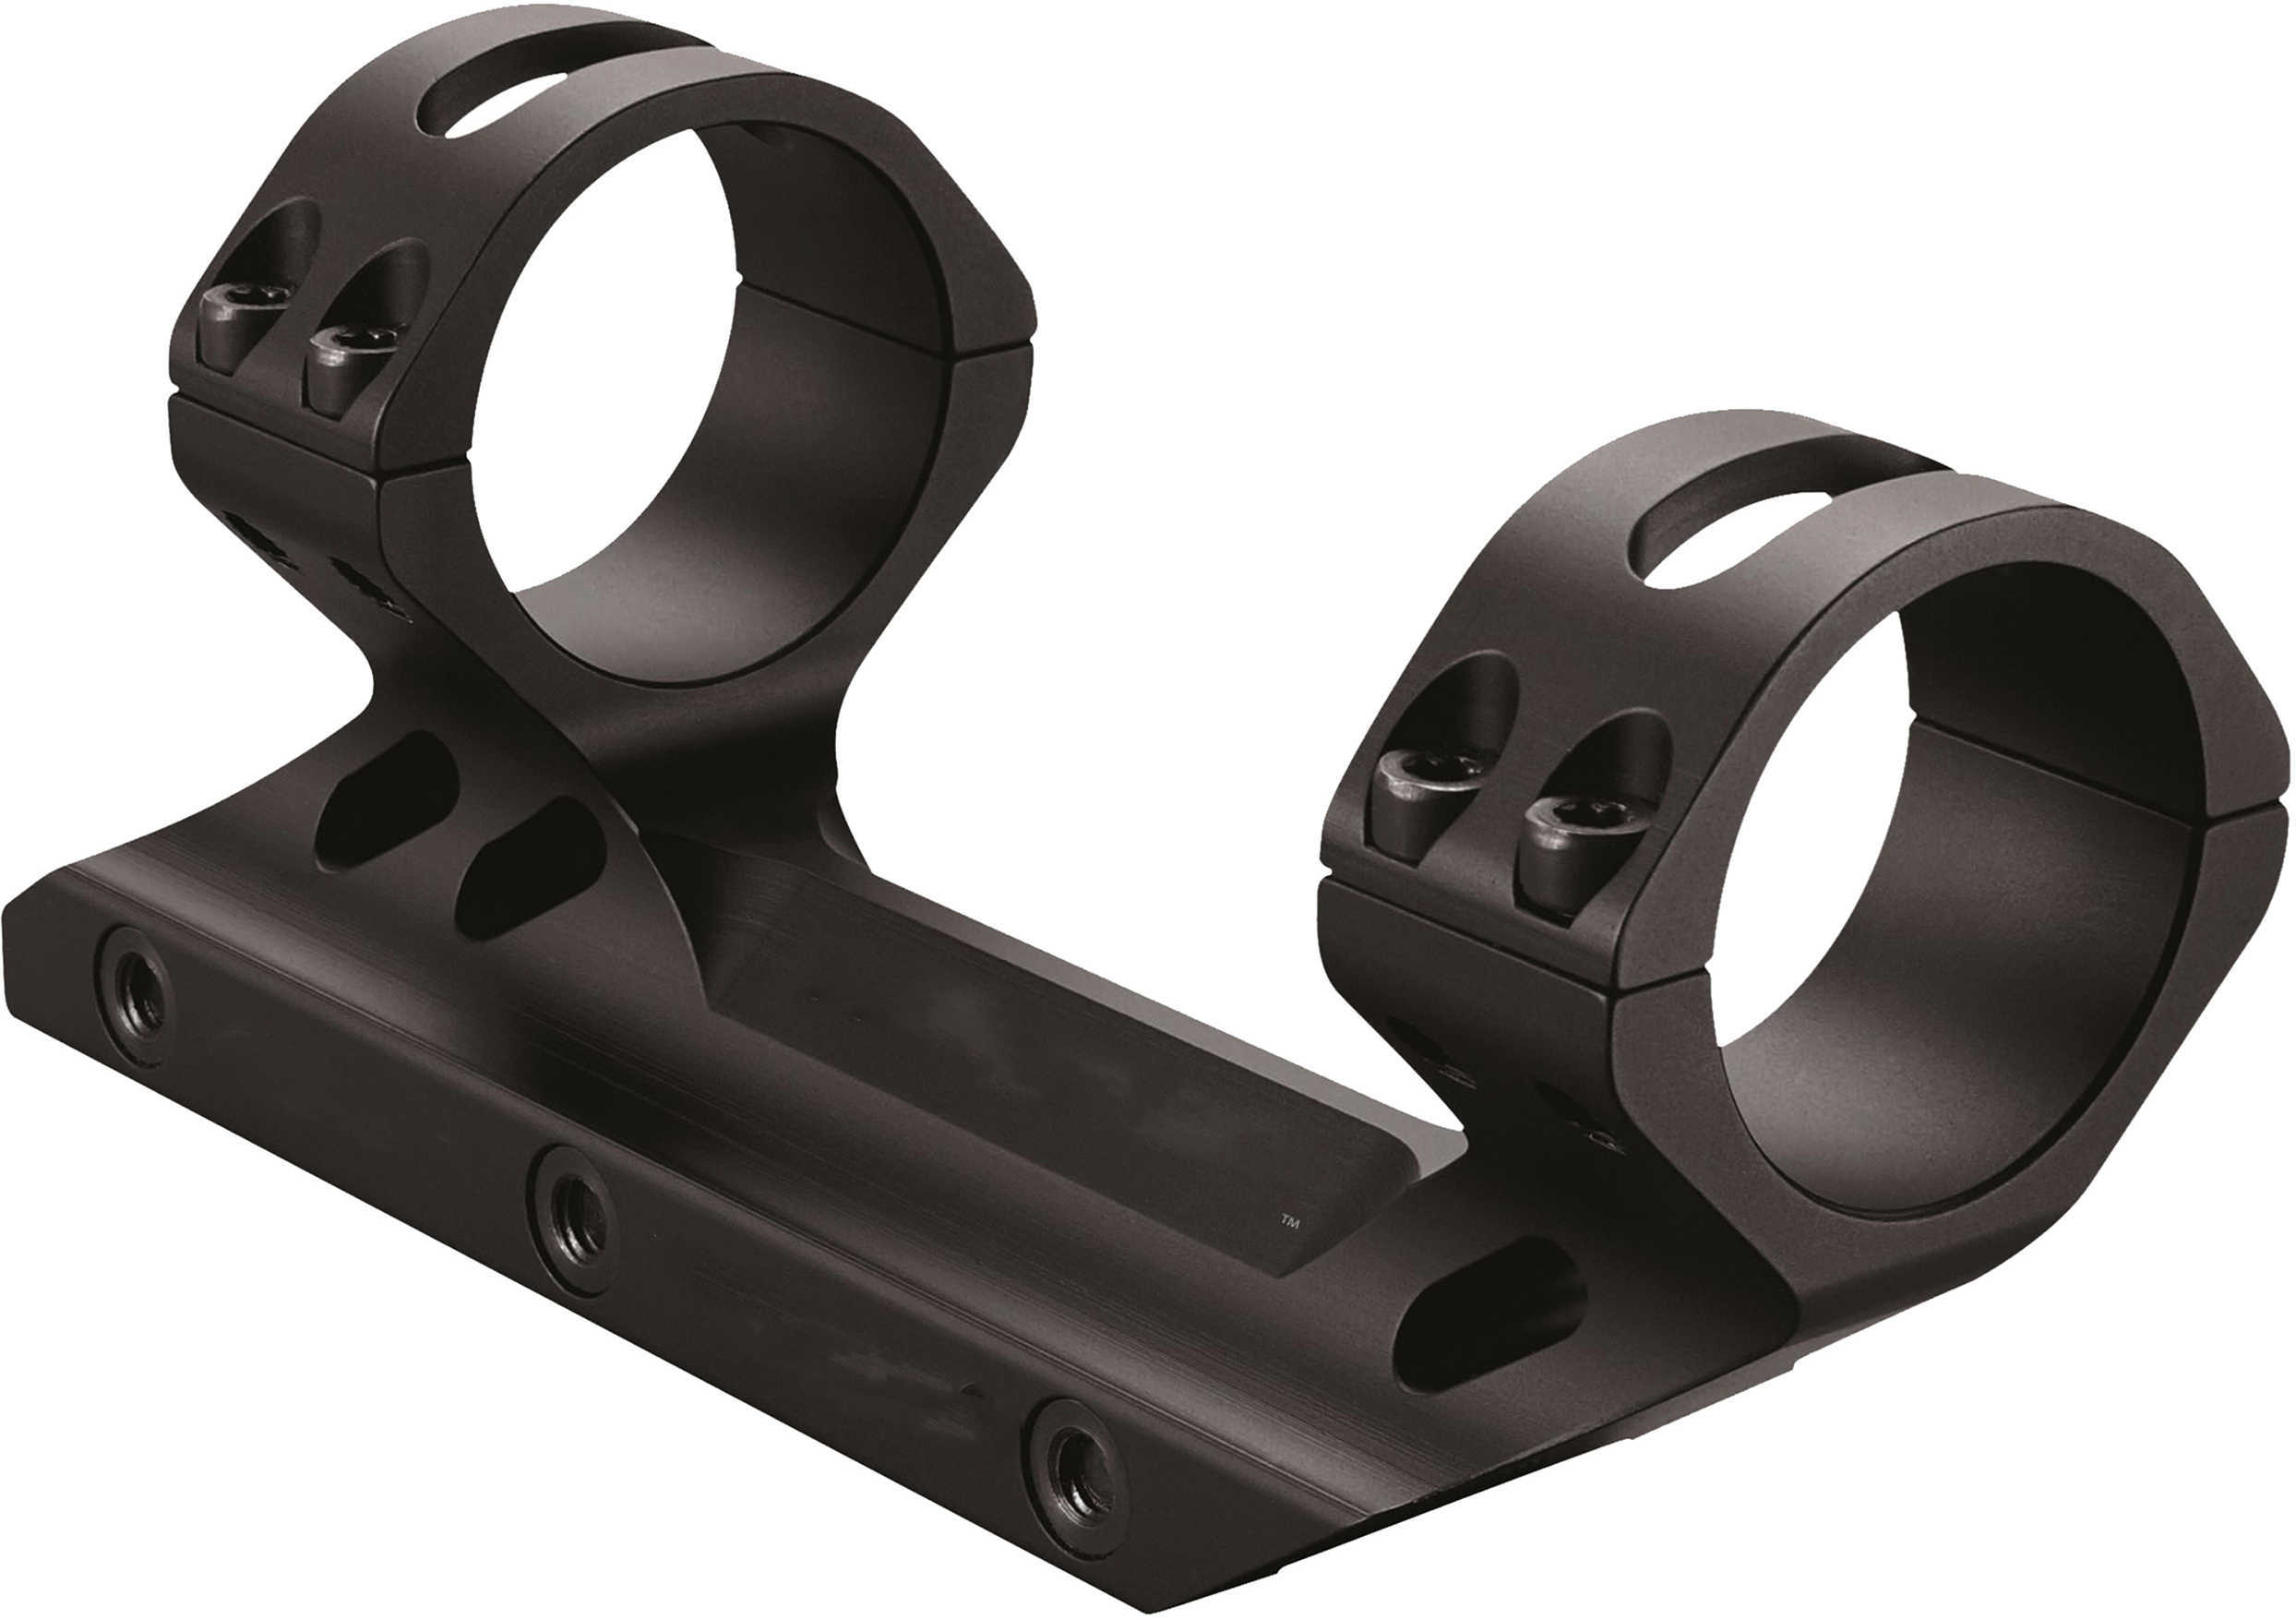 Premium MSR 1-Piece Scope Mount Picatinny Style with Intregral Rings, 1" Tube Diameter, Matte Black